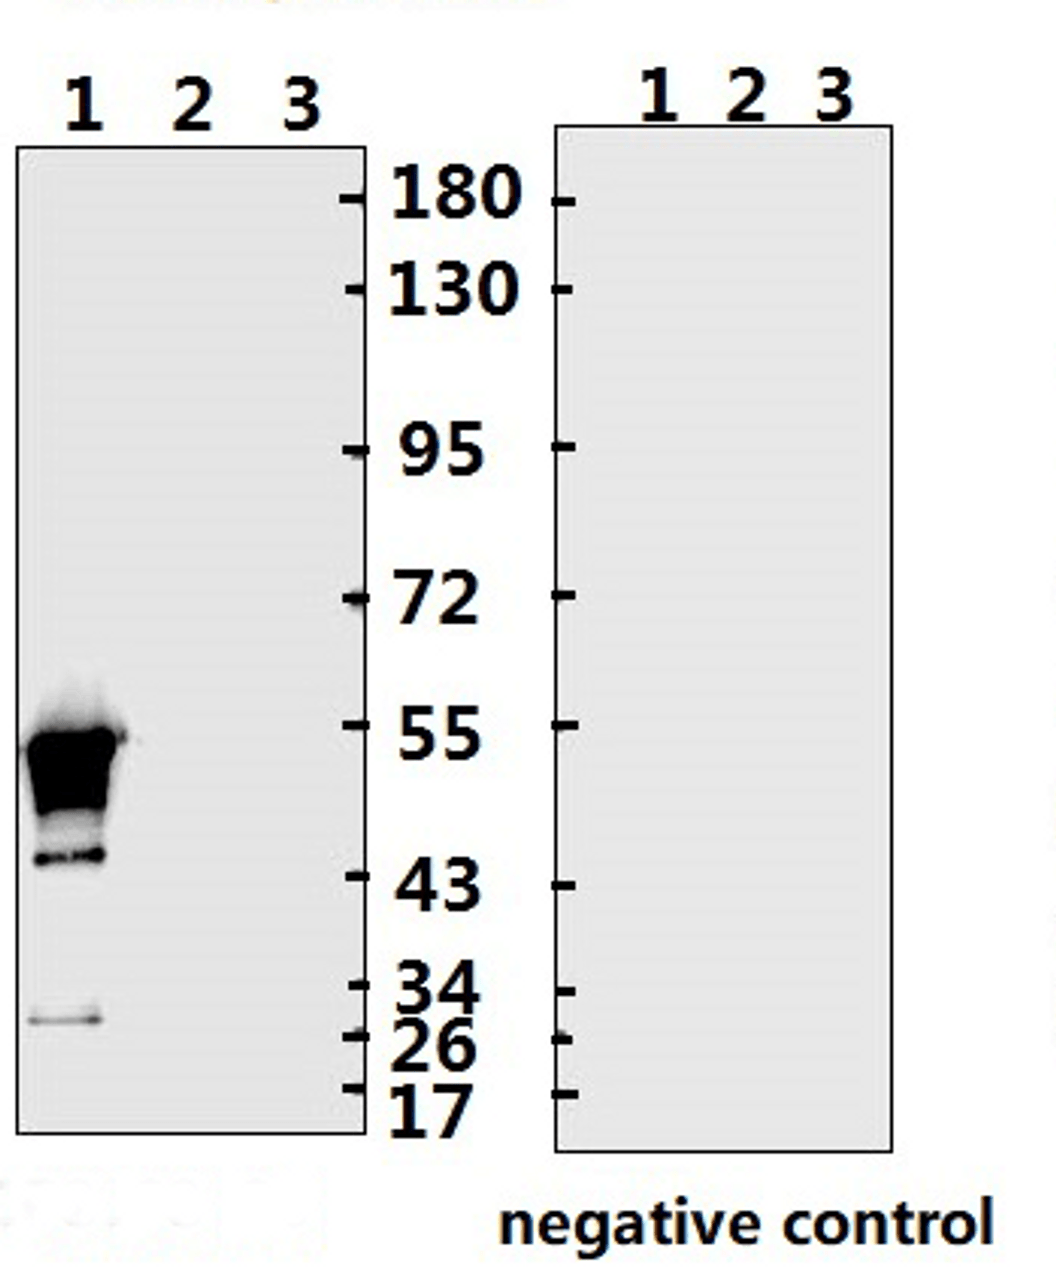 <strong>Figure 1 Western Blot Validation with Recombinant Protein</strong><br>Loading: 1ug of recombinant protein per lane. Lane 1: 10-007, Lane 2: 10-008 and Lane 3: 10-011. Antibodies: SARS-CoV-2 (COVID-19) Nucleocapsid, 10-508, 1:500. Secondary: Goat anti-rabbit IgG HRP conjugate at 1:20000 dilution.